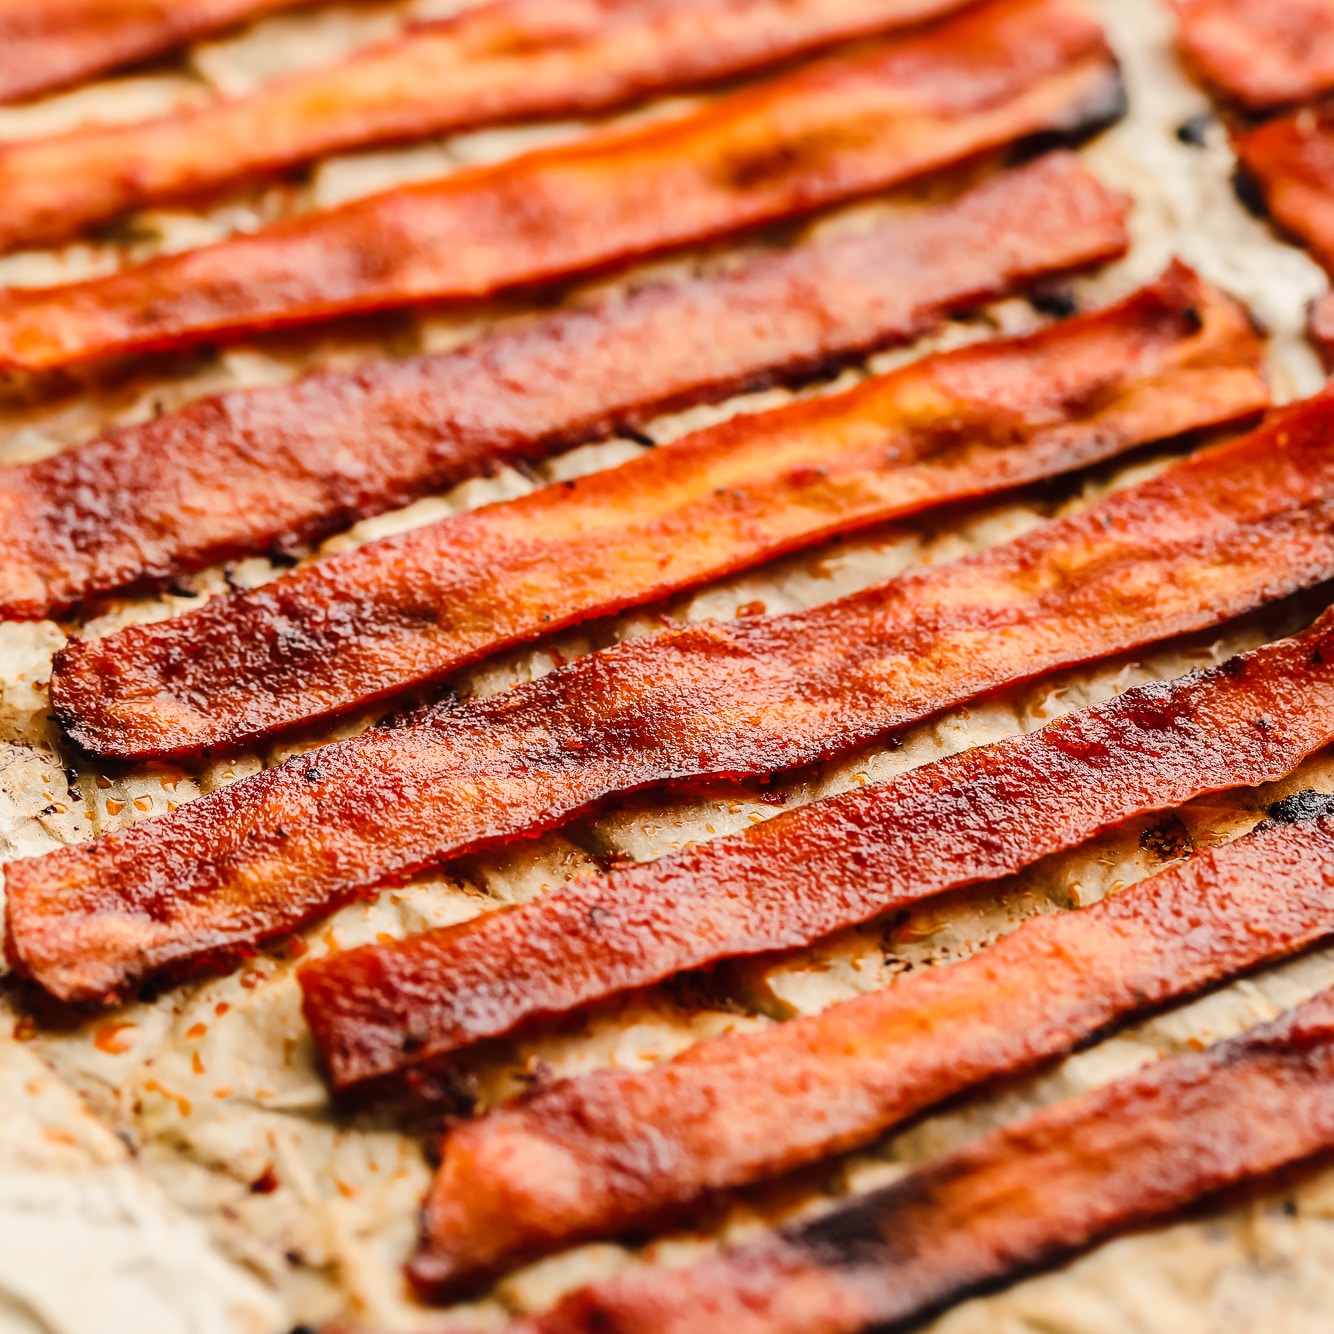 The Best Plant-Based Bacon to Buy in 2022